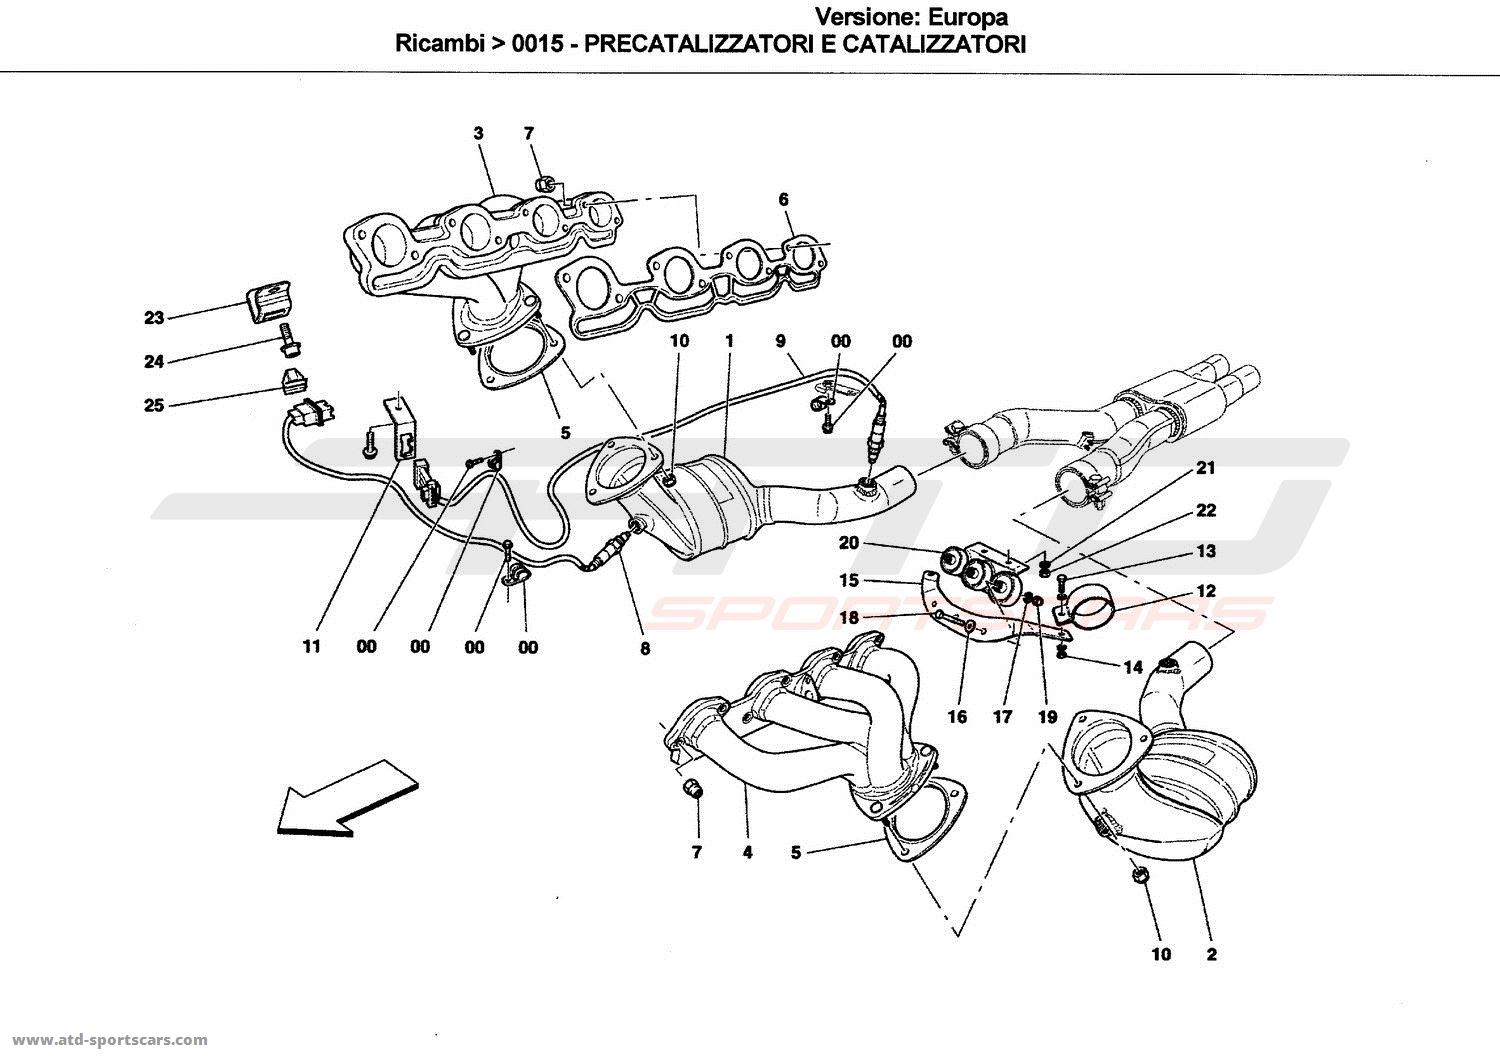 PRE-CATALYTIC CONVERTERS AND CATALYTIC CONVERTERS